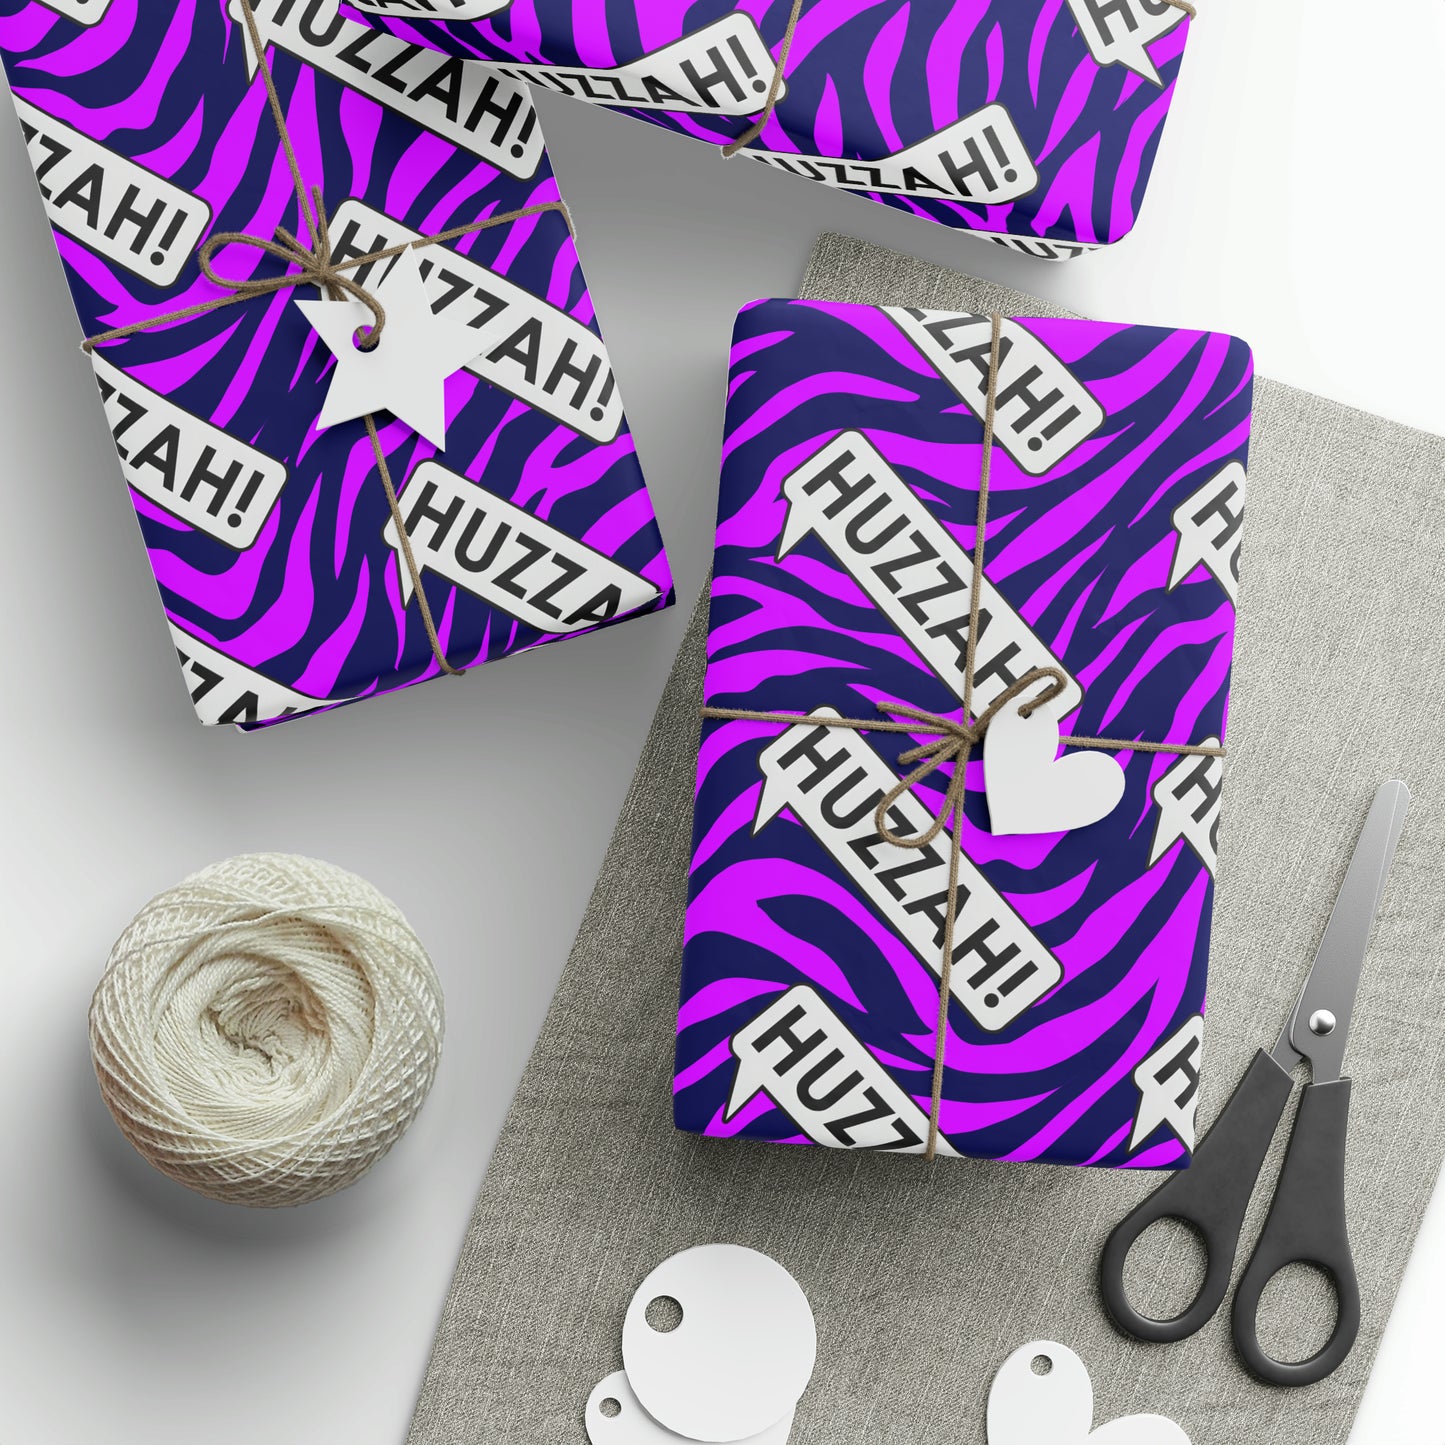 Huzzah Hype – Anticipation Amplifying Wrapping Paper